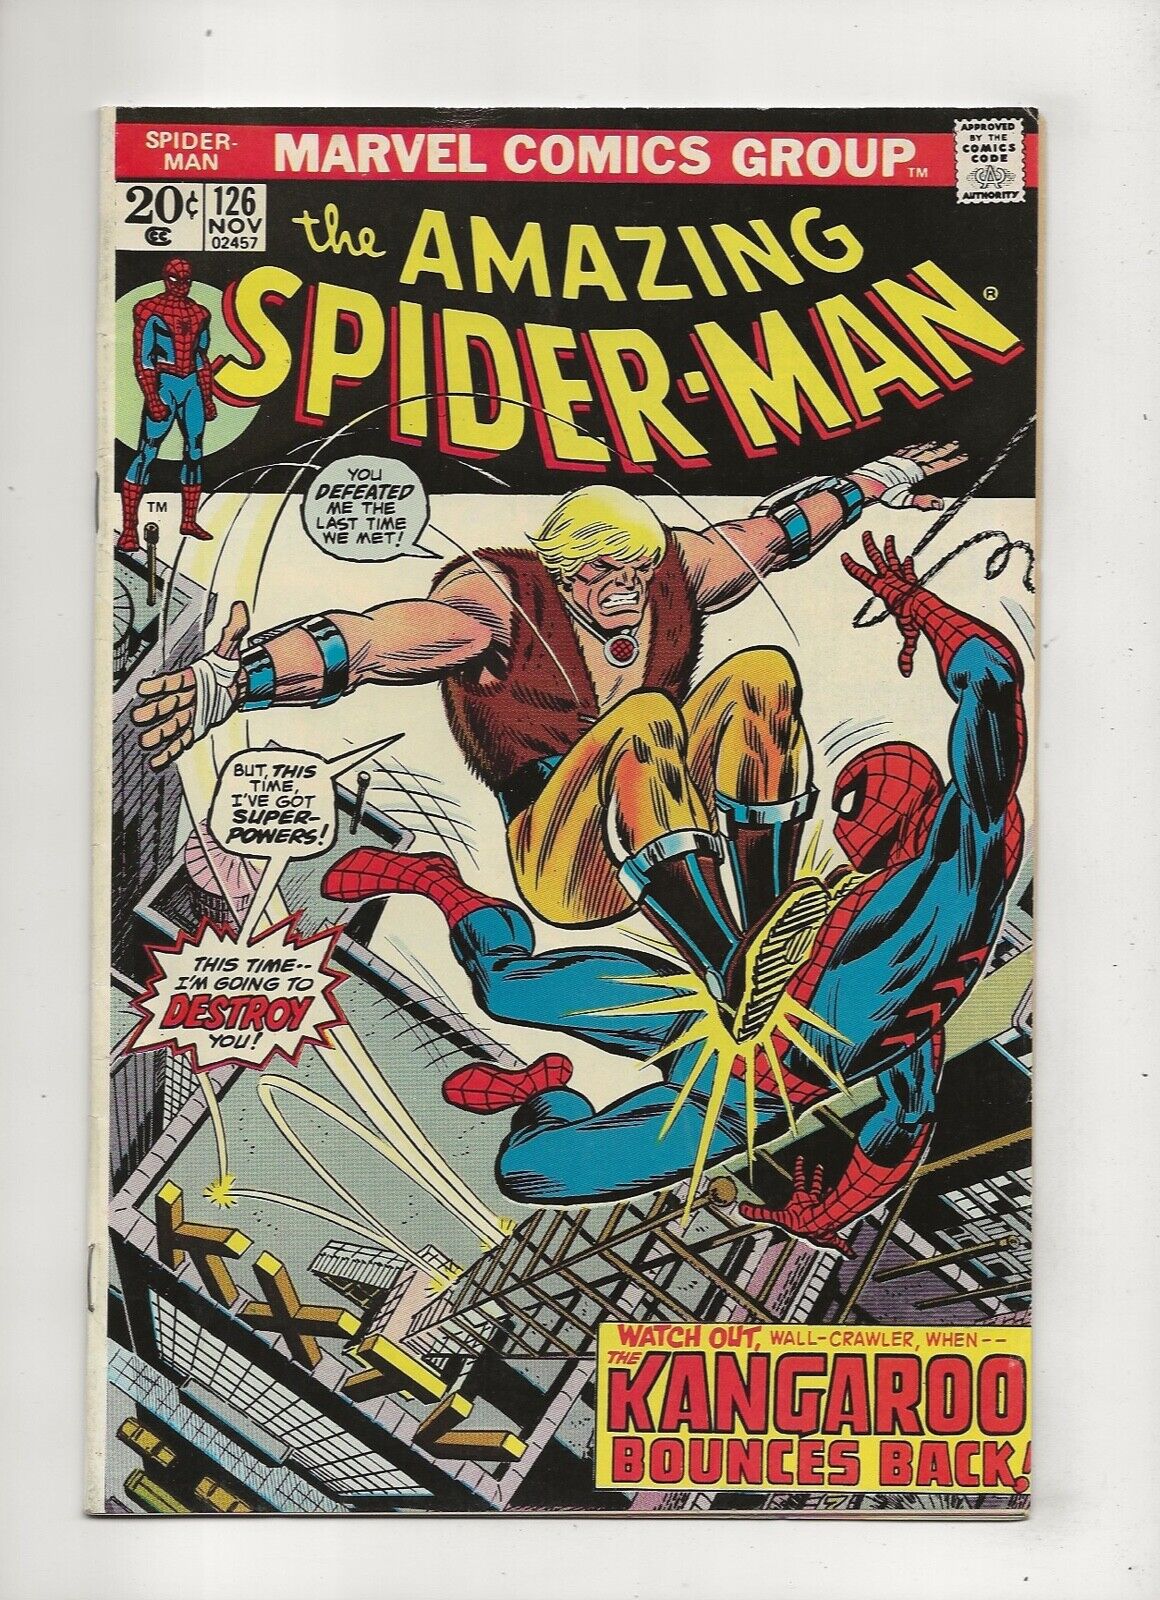 The Amazing Spider-Man #126 (1973) FN+ 6.5